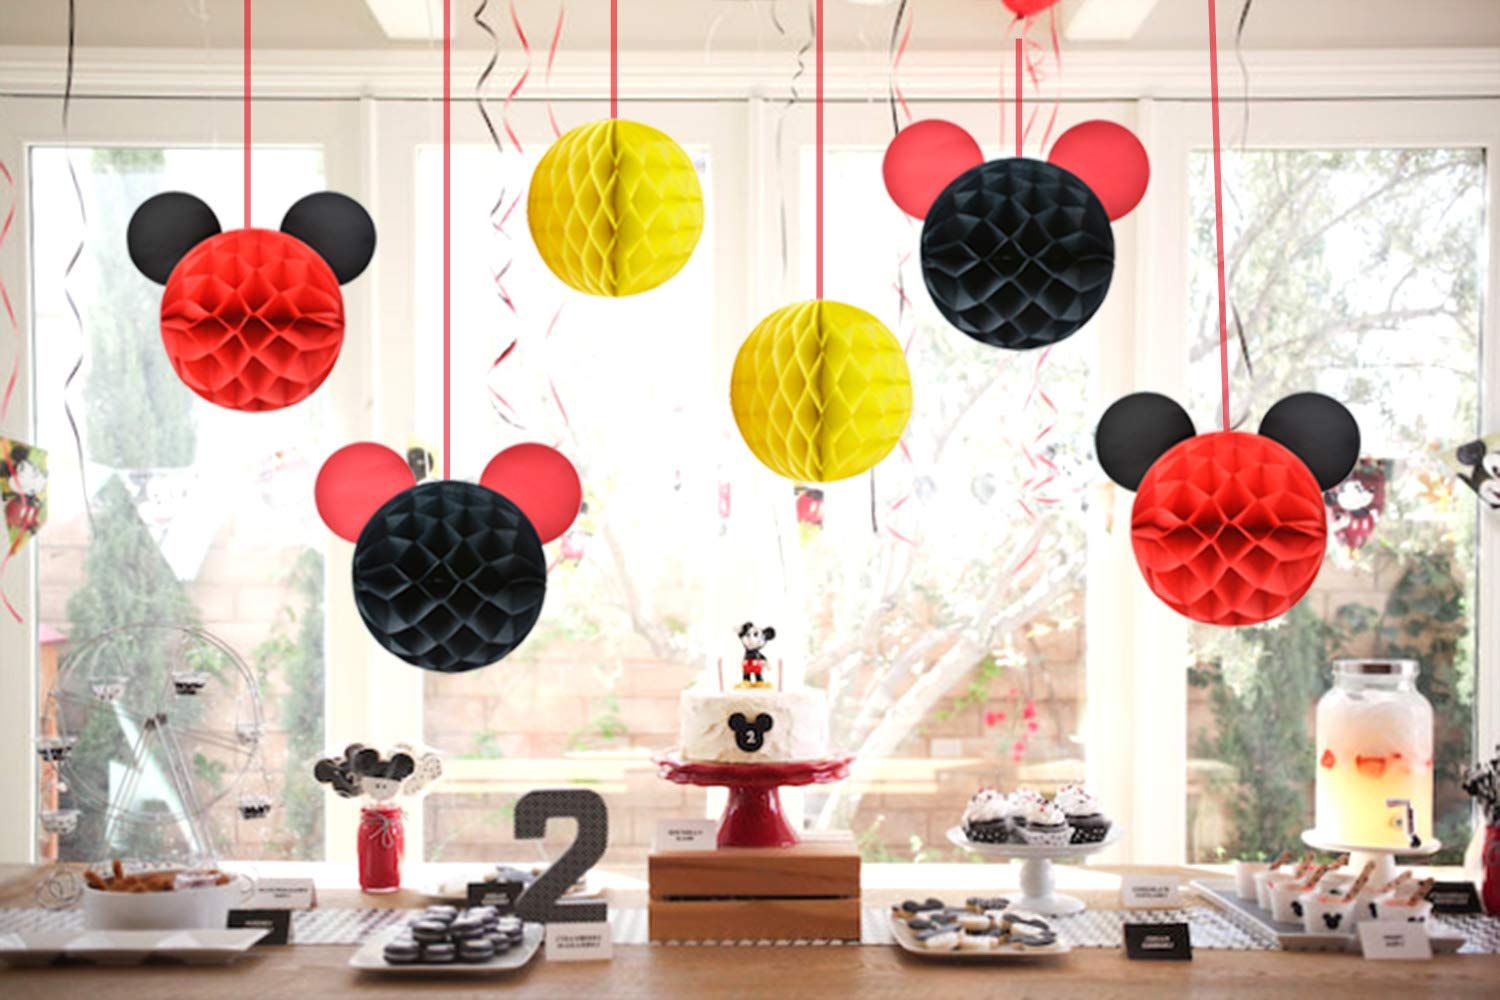 Mickey Mouse Party Ideas - Two Sisters